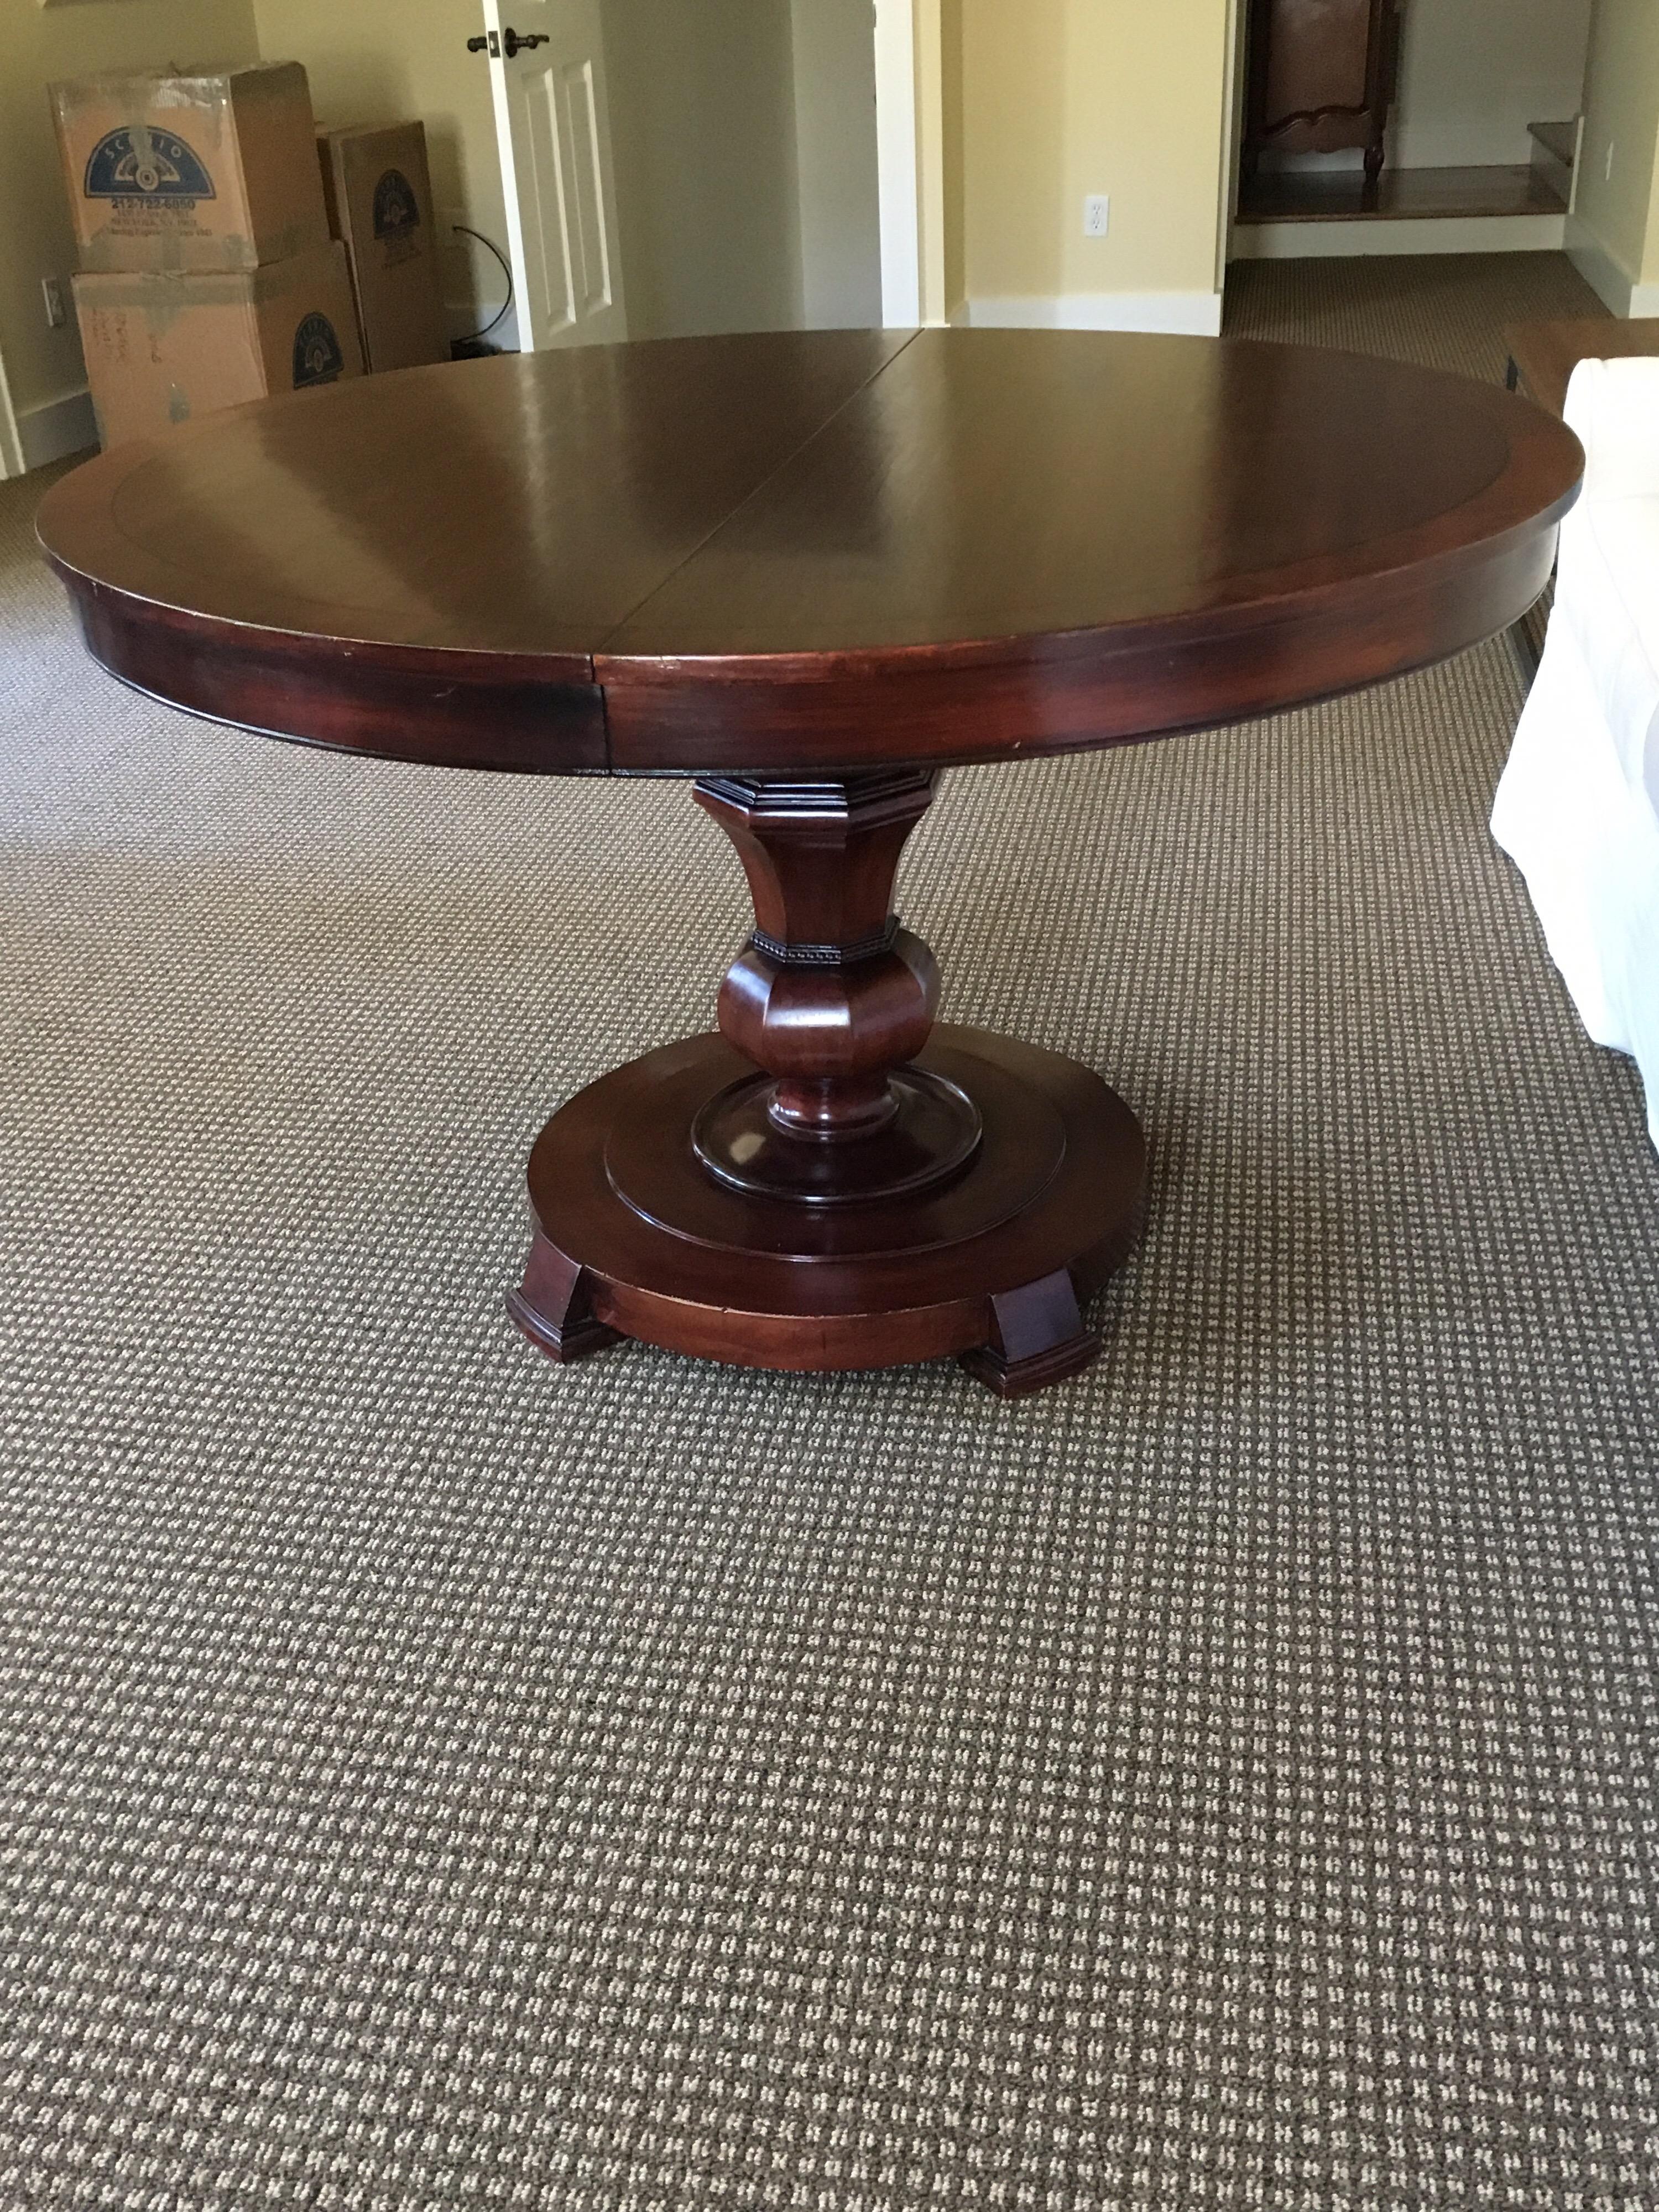 Round Rosewood Pedestal Center or Dining Table, 1950s by Maitland Ward For Sale 4